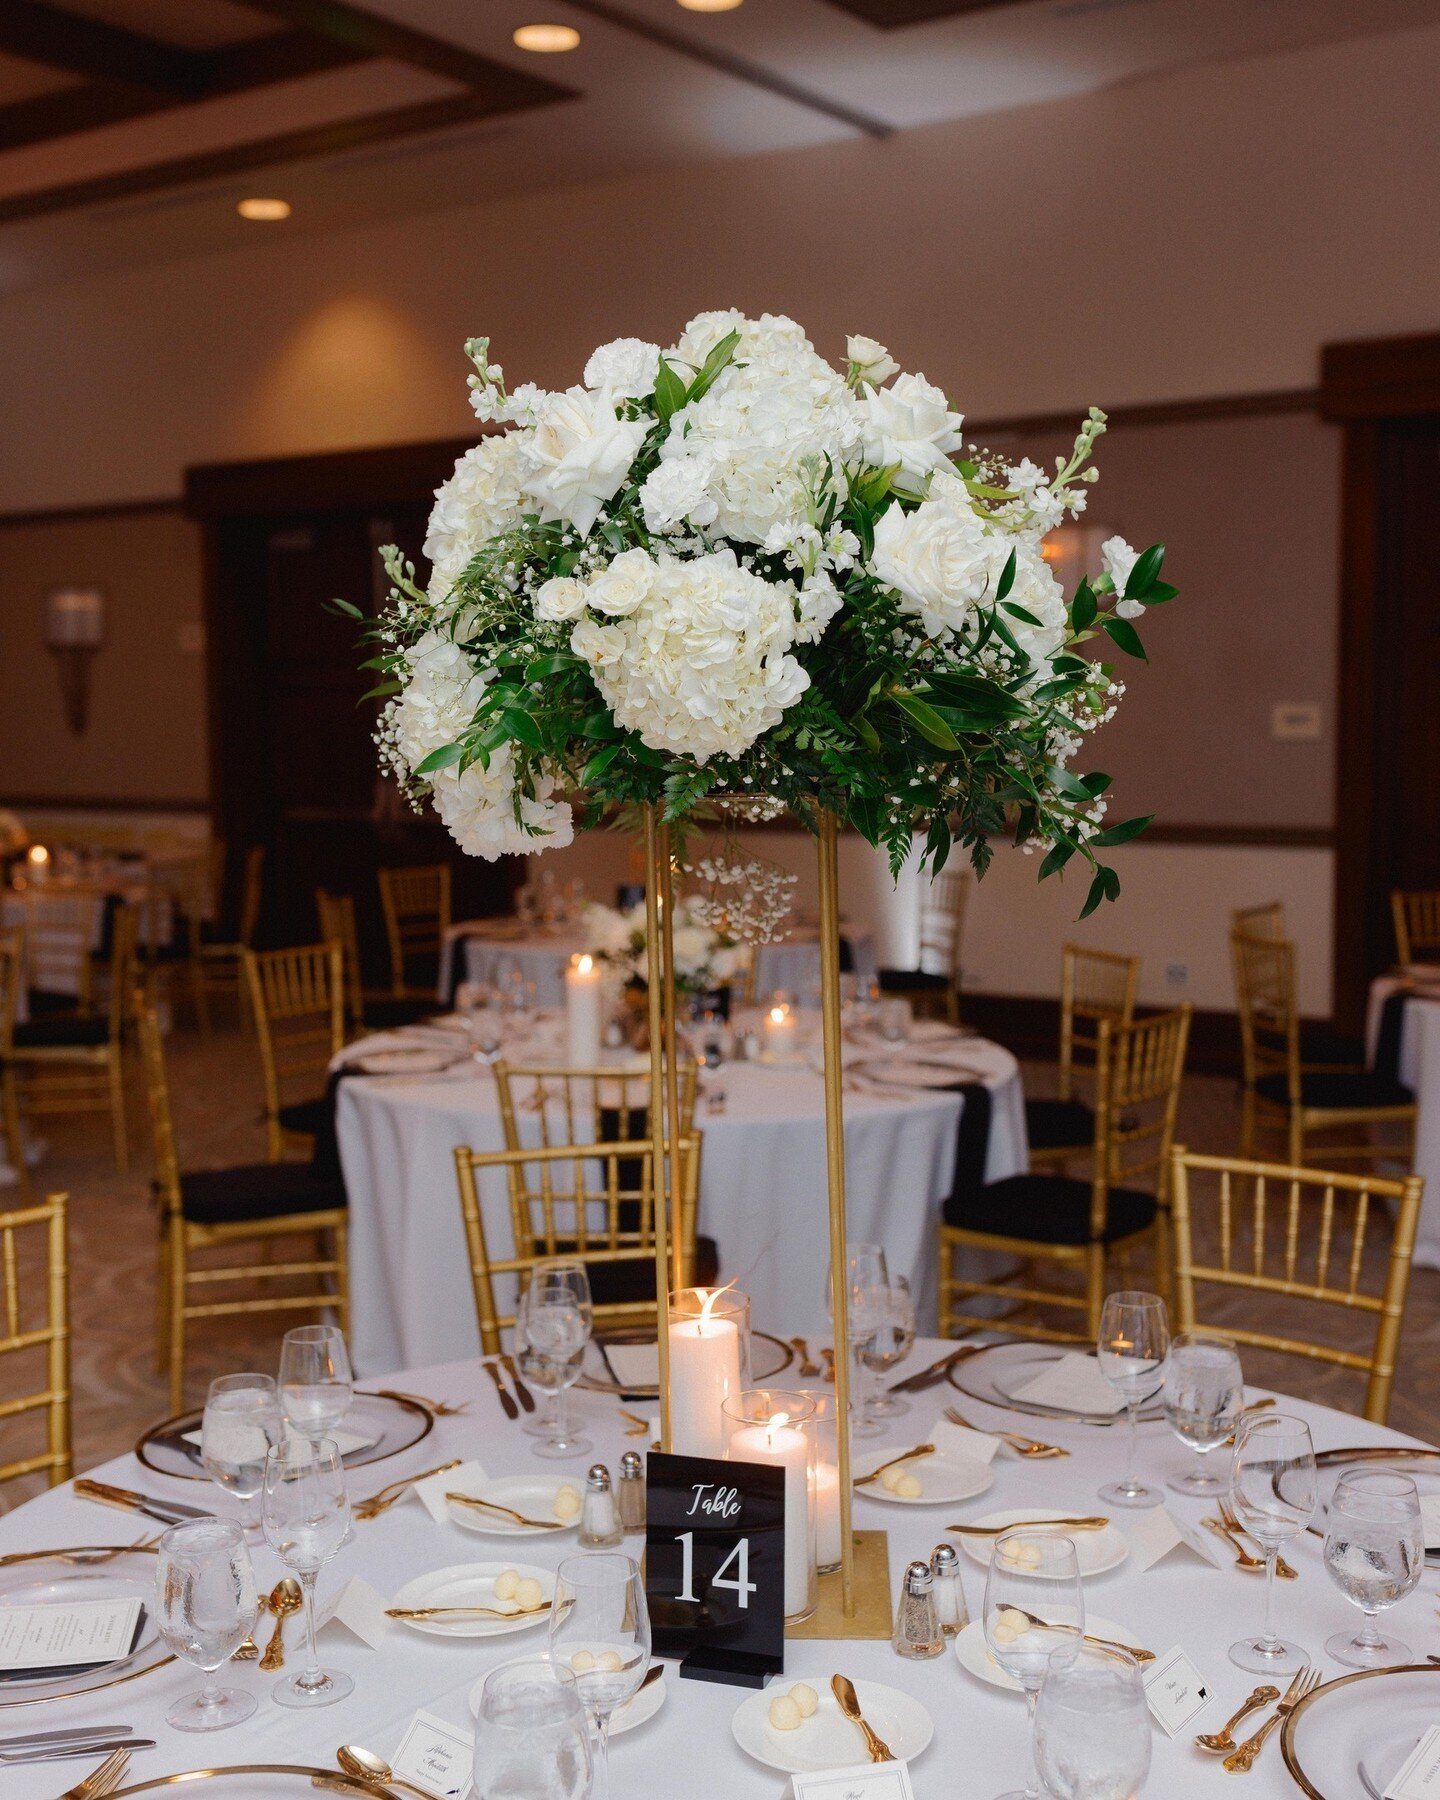 Every detail matters. When planning your wedding, don't forget to add a special touch with flowers during the reception. ⁠
.⁠
.⁠
.⁠
.⁠
.⁠
.⁠
Photographer: @allieandjoey⁠
Planner: @planit_events⁠
Venue: @thealfondinn | alfondinnweddings⁠
Rentals: @oce